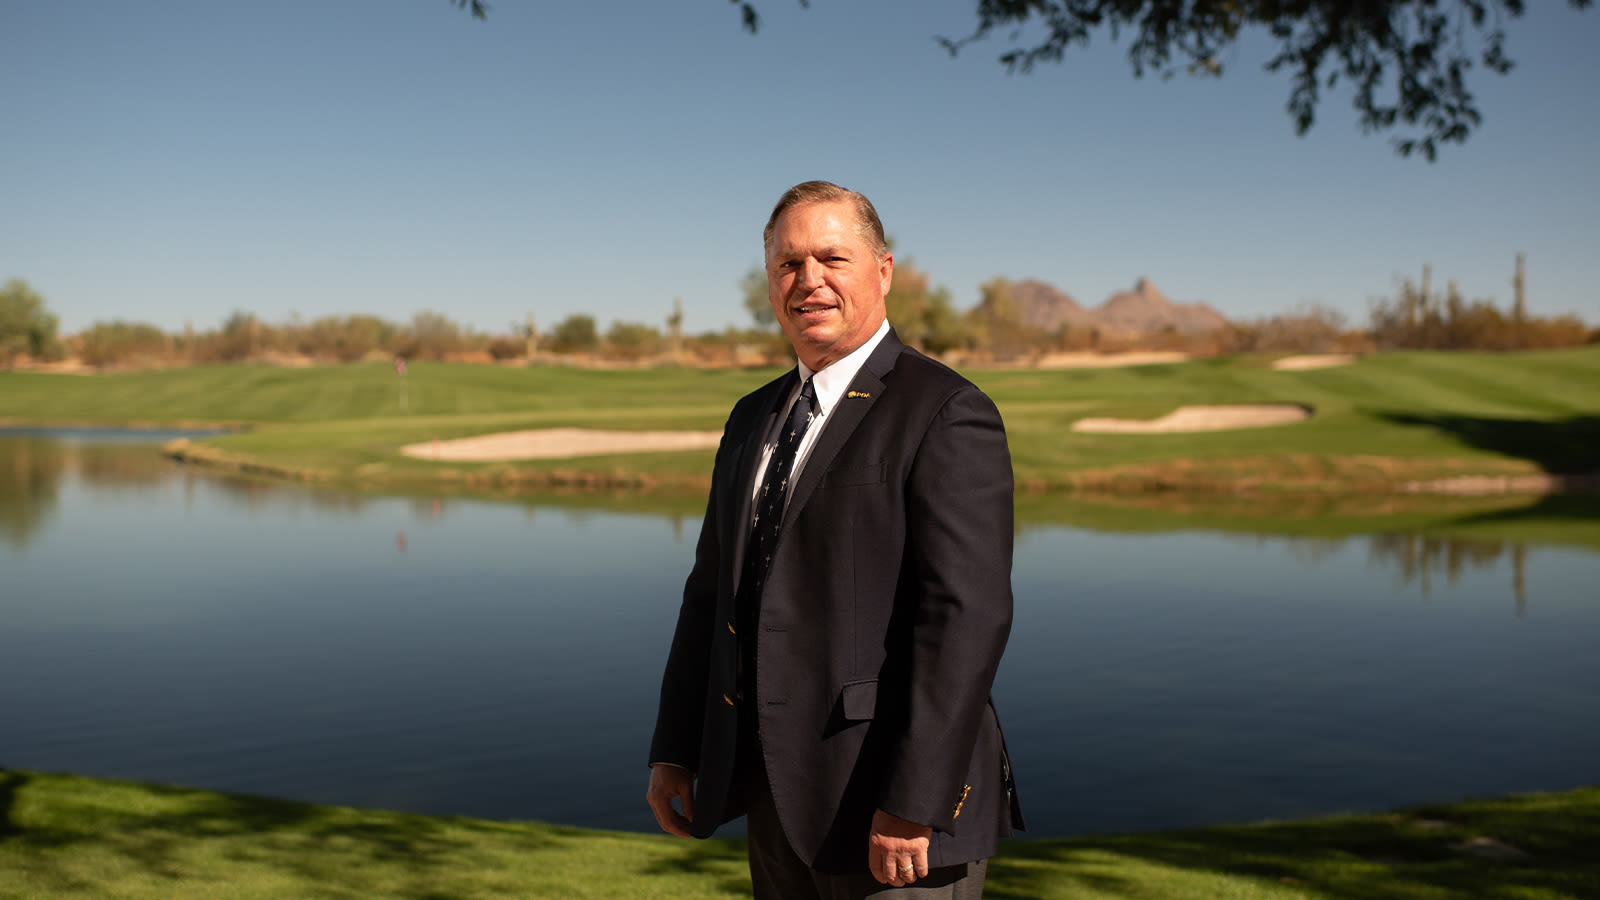 PGA of America President, Jim Richerson poses for a photo during the 104th PGA Annual Meeting at Grayhawk Golf Club on October 29, 2020 in Scottsdale, AZ. (Photo by Traci Edwards/The PGA of America)